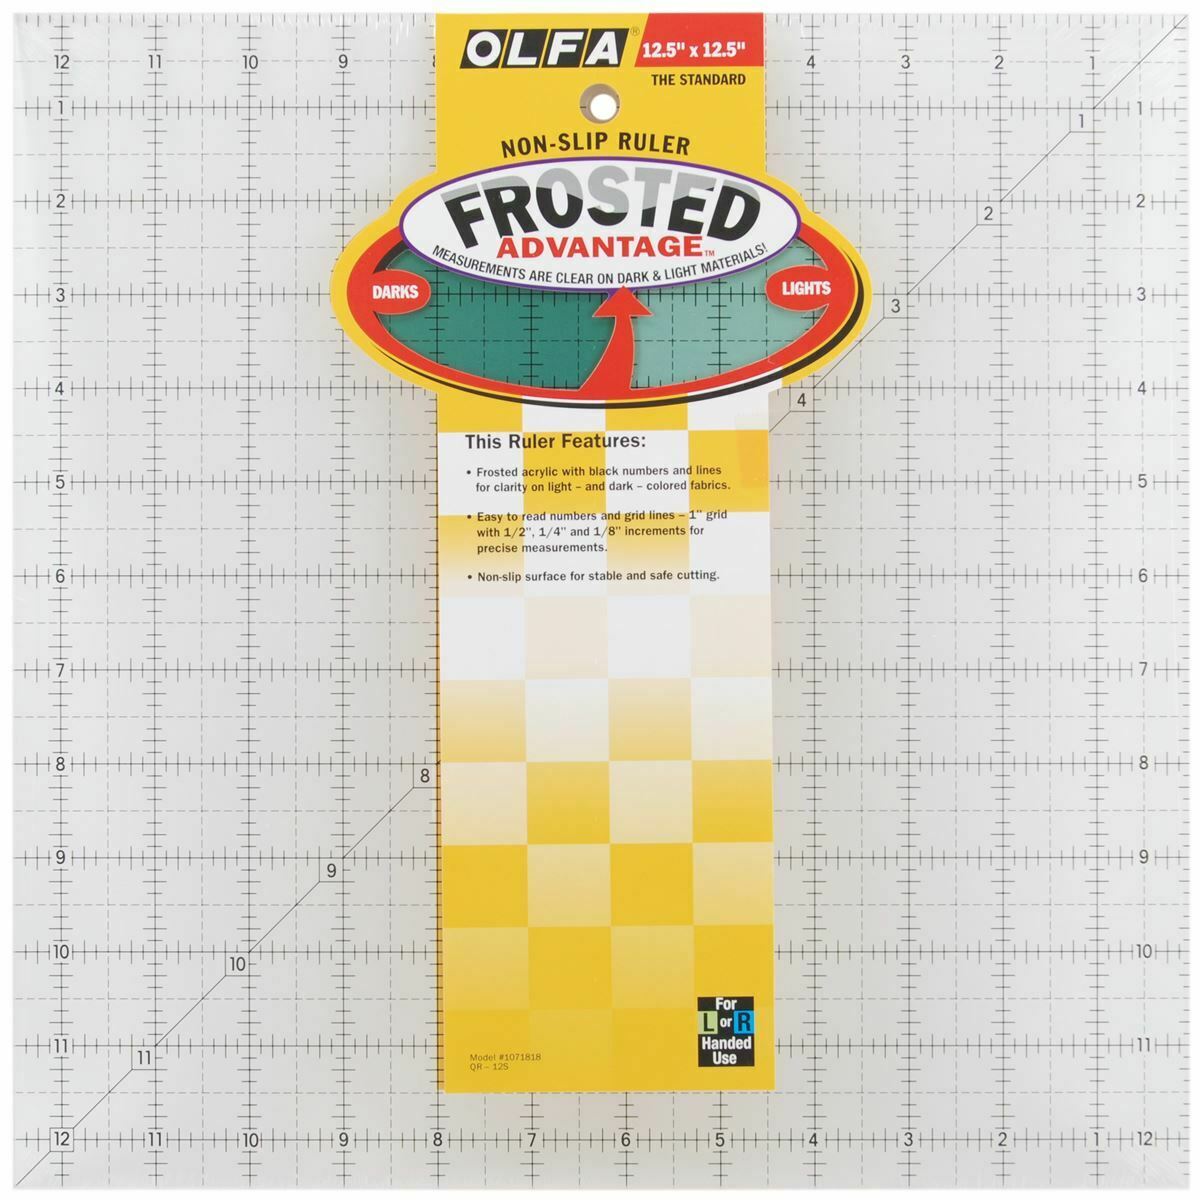 OLFA Quilt Frosted 12,5x12,5 INCH